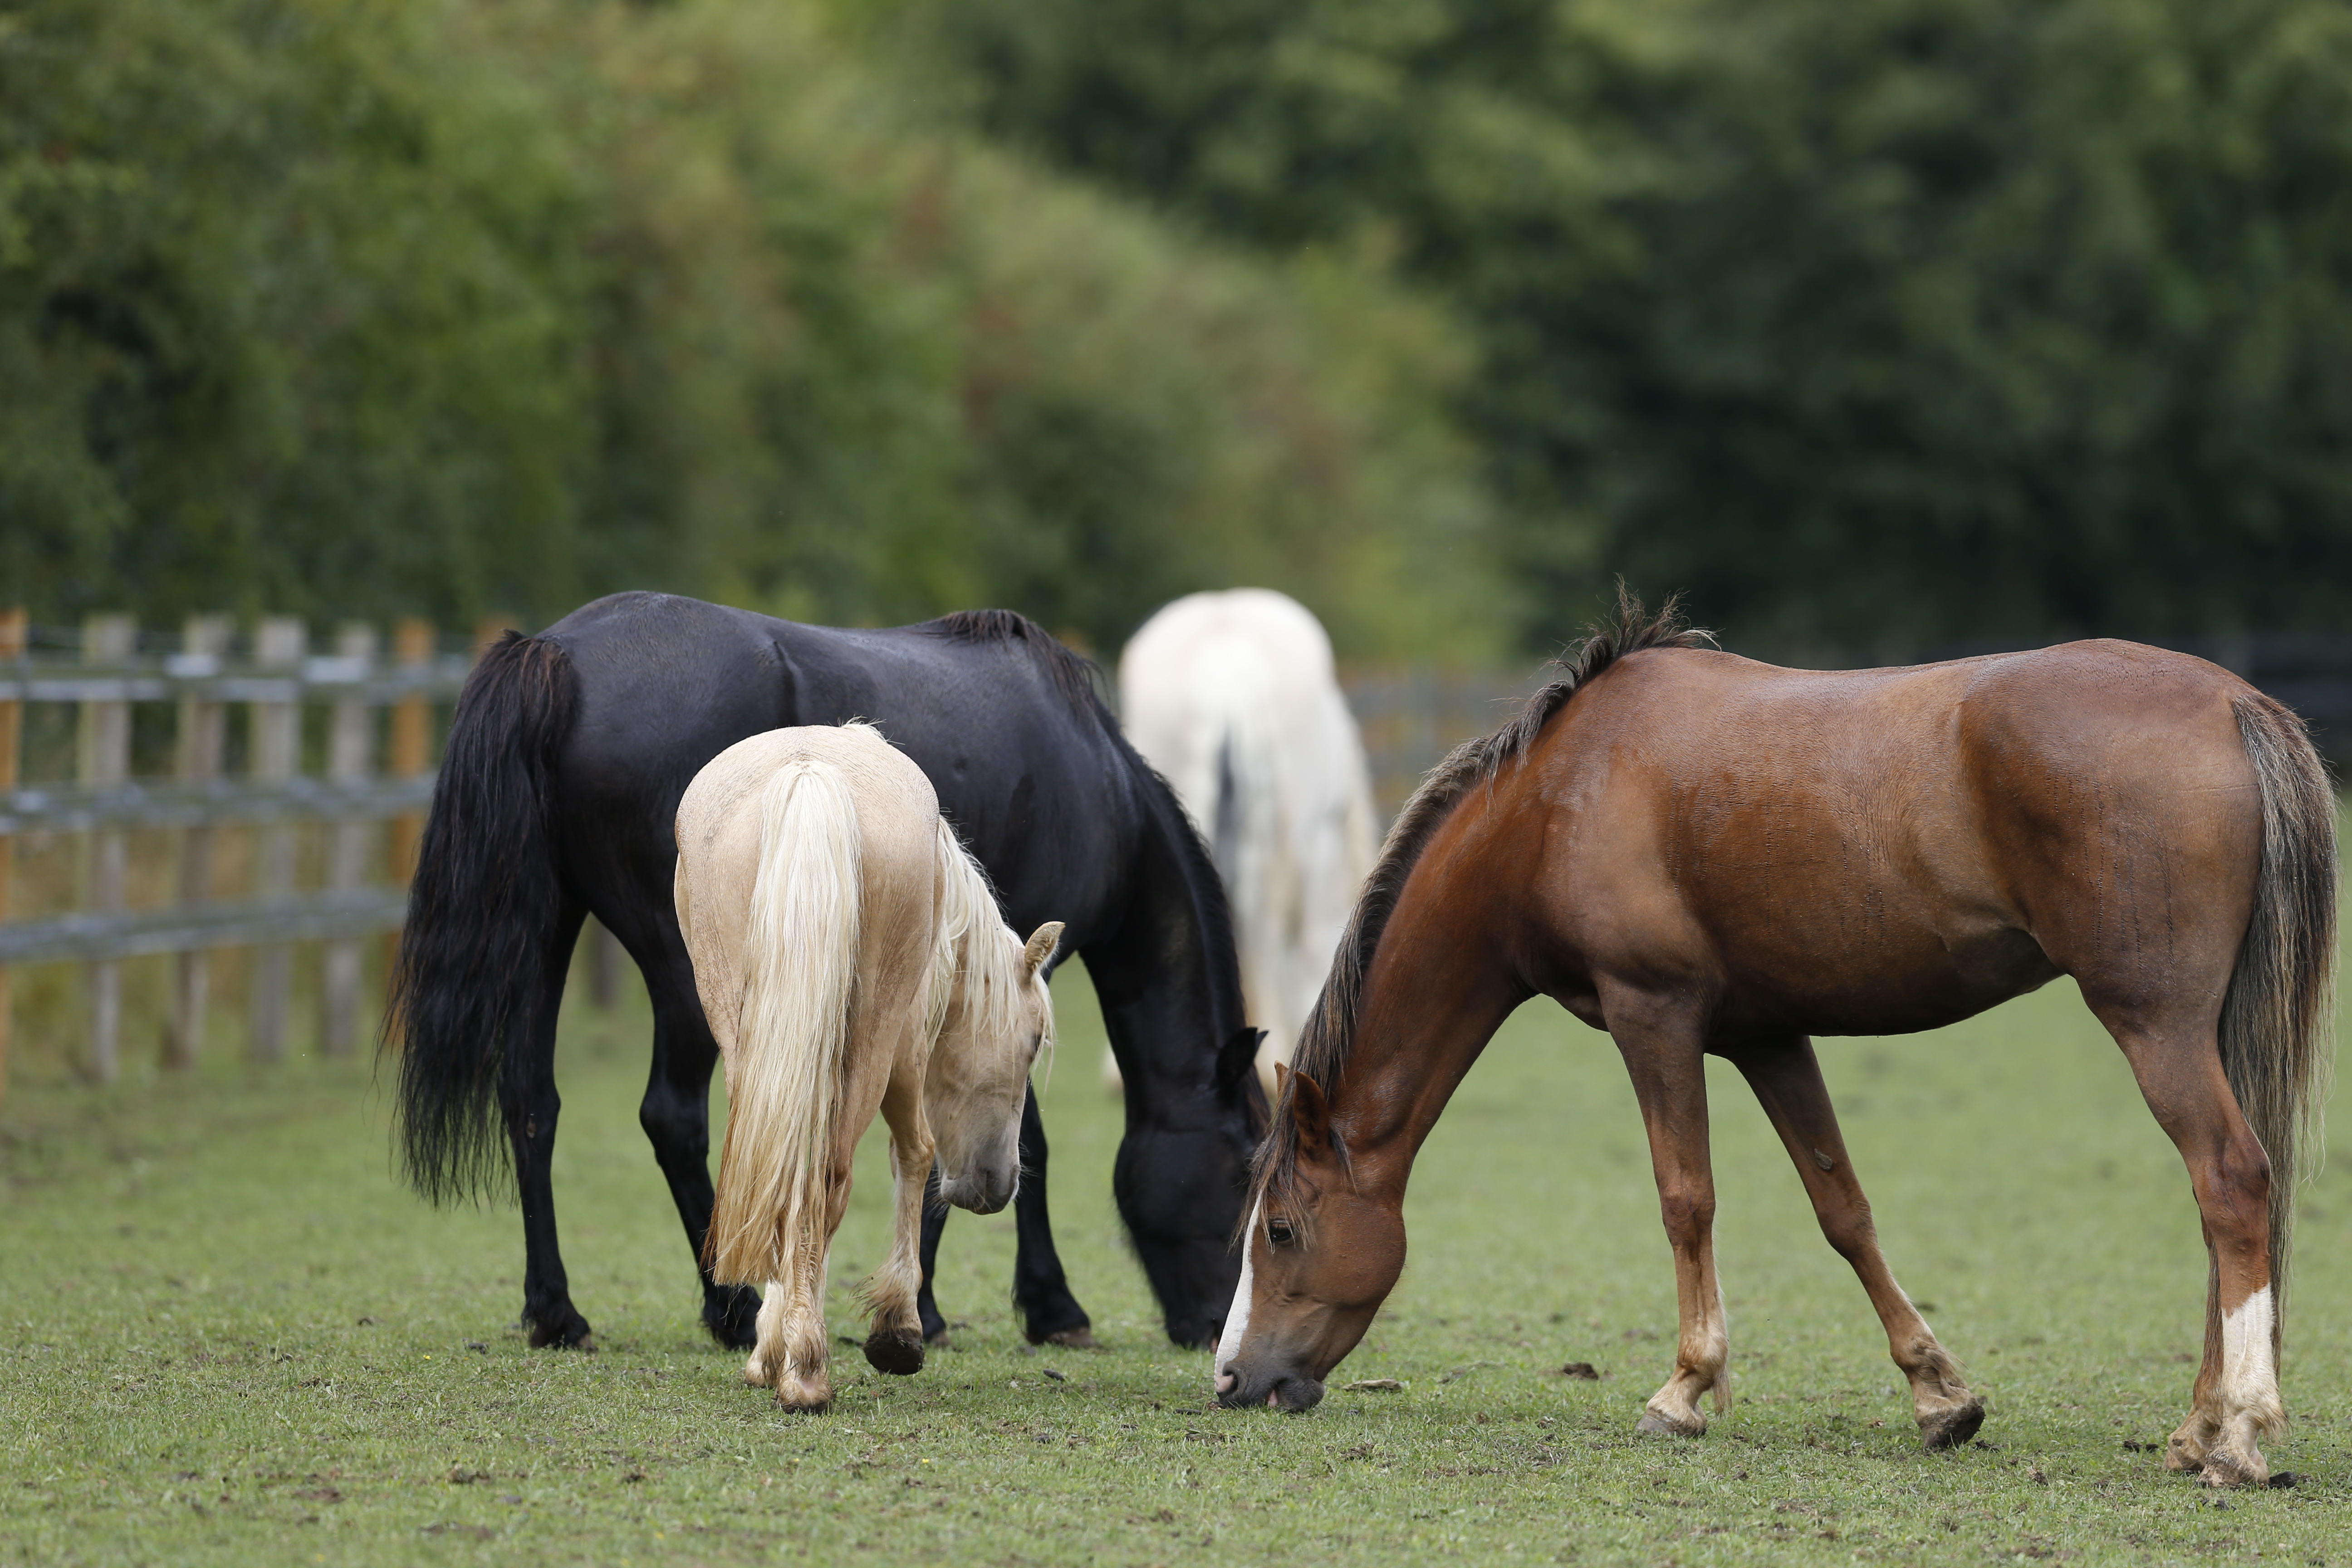 Horses eating together in a field